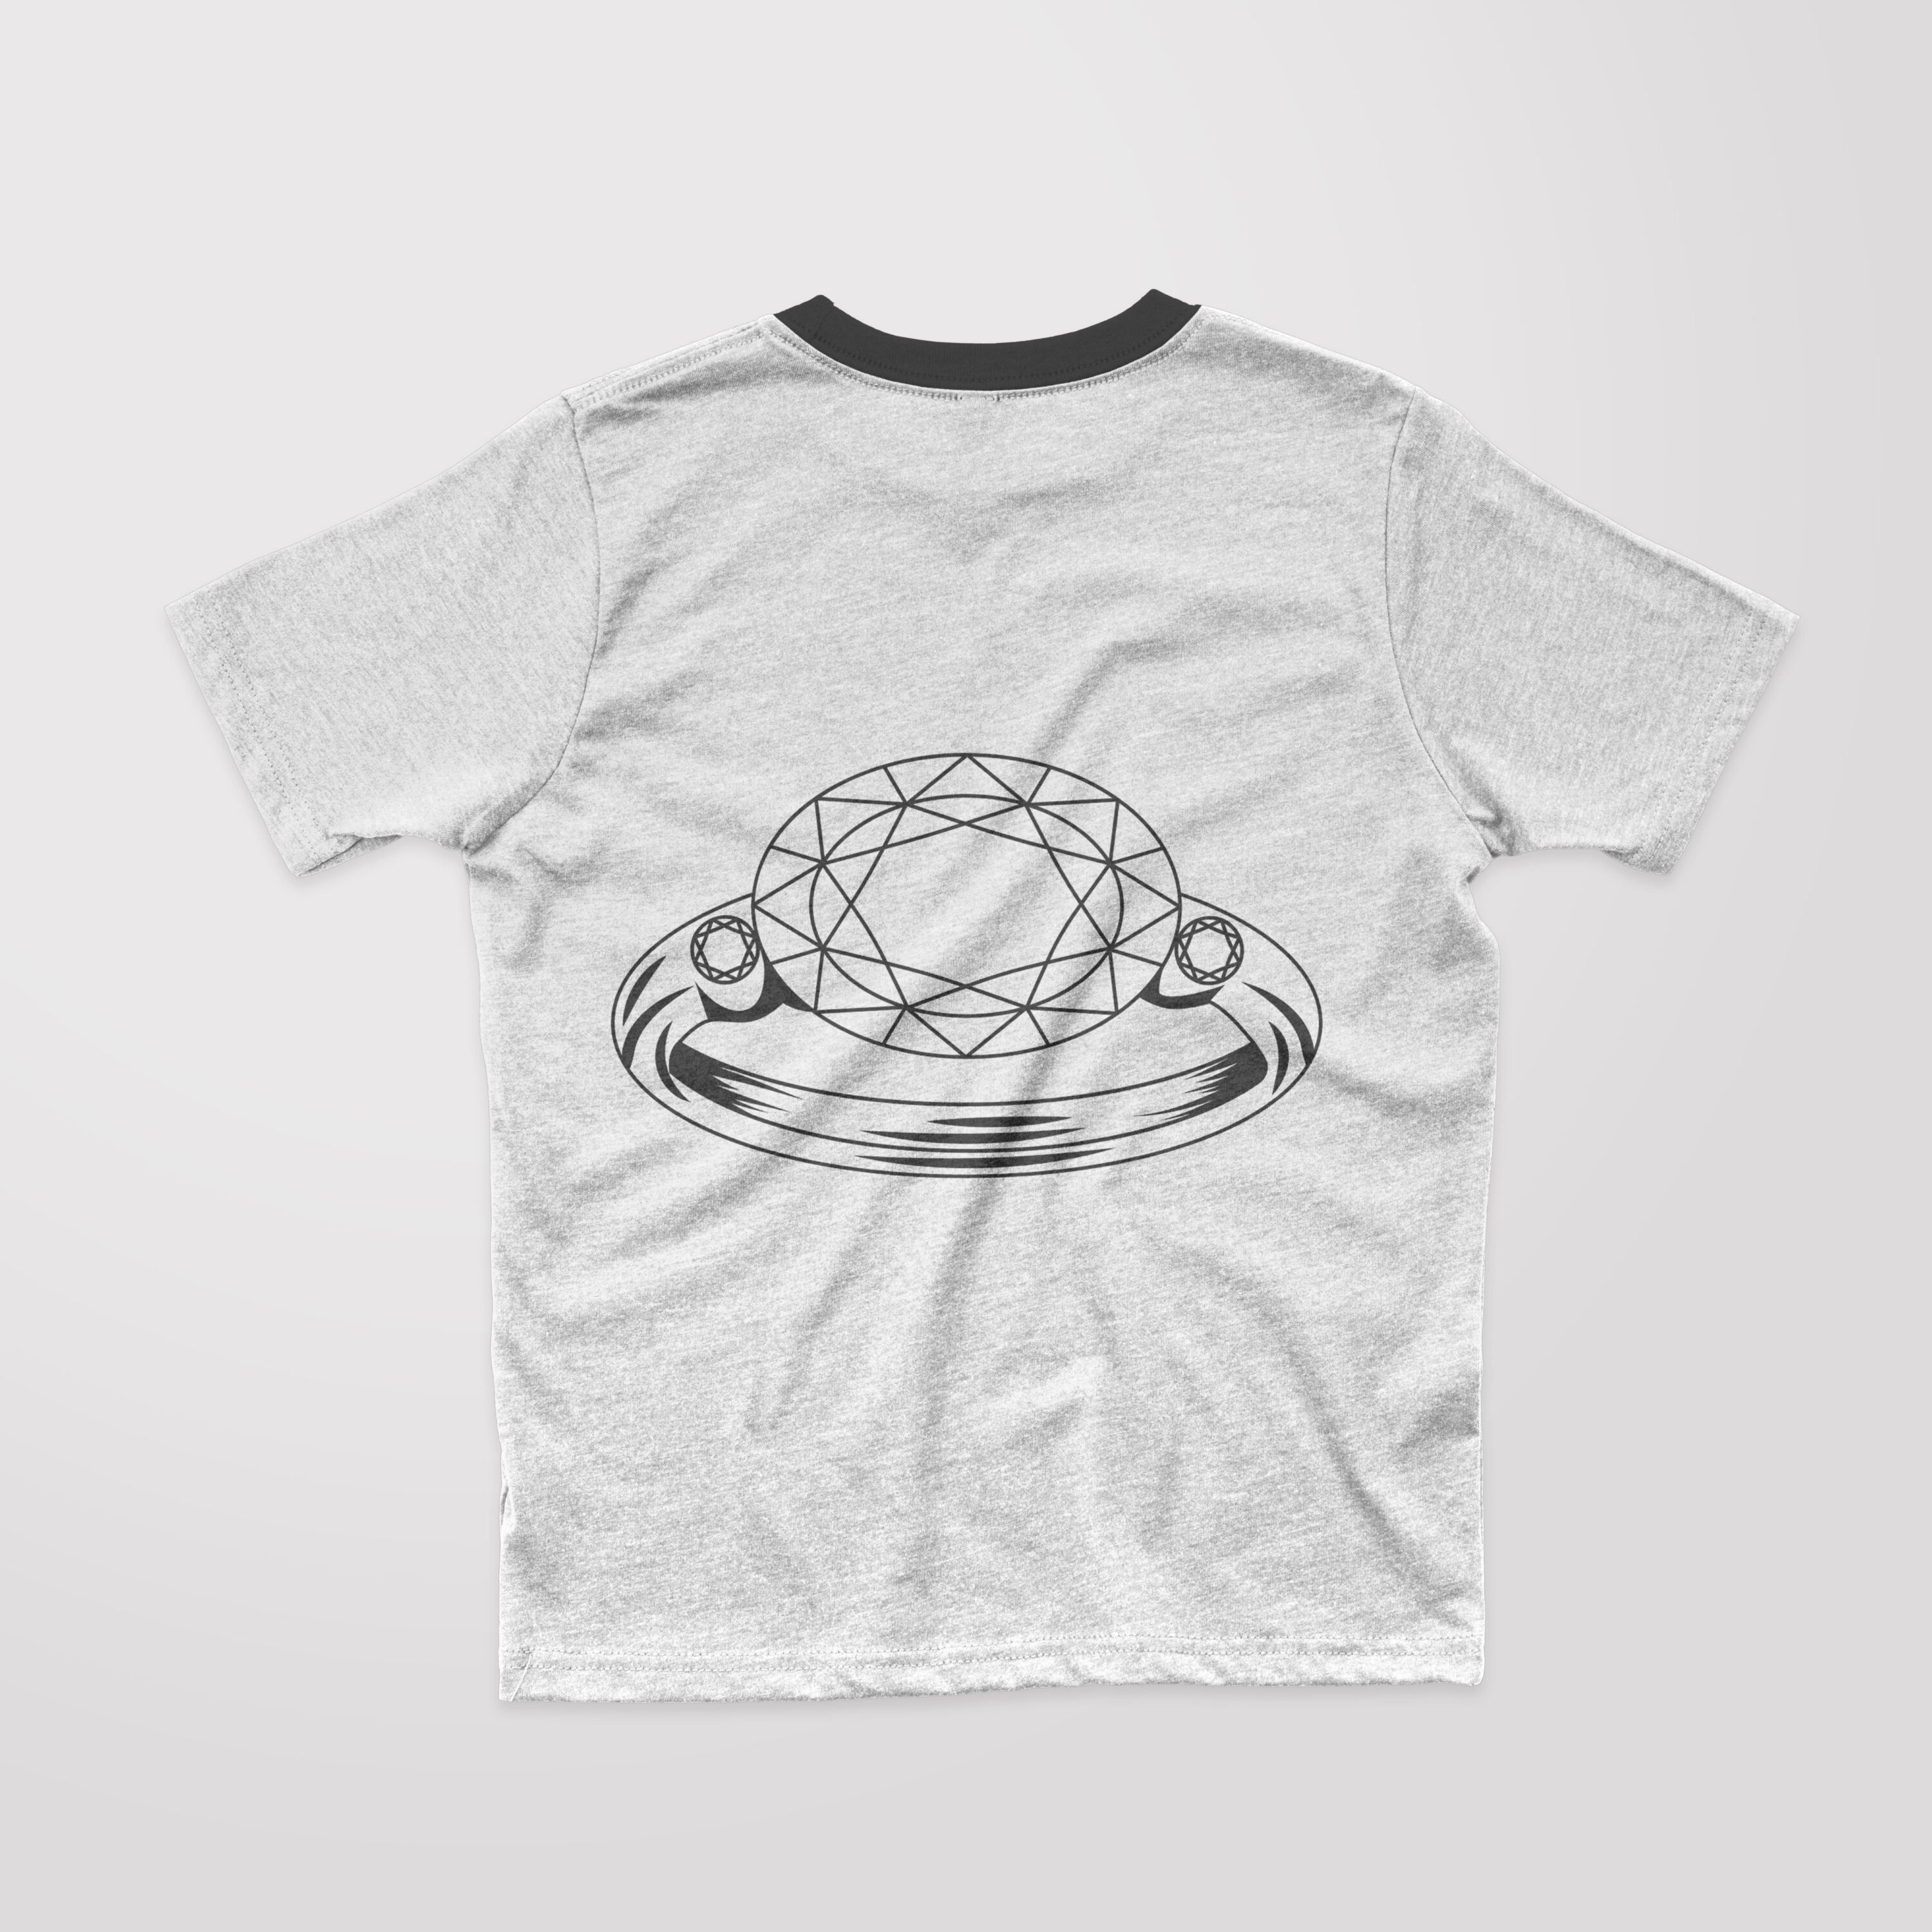 Image of a T-shirt with a beautiful print of a outline diamond ring.